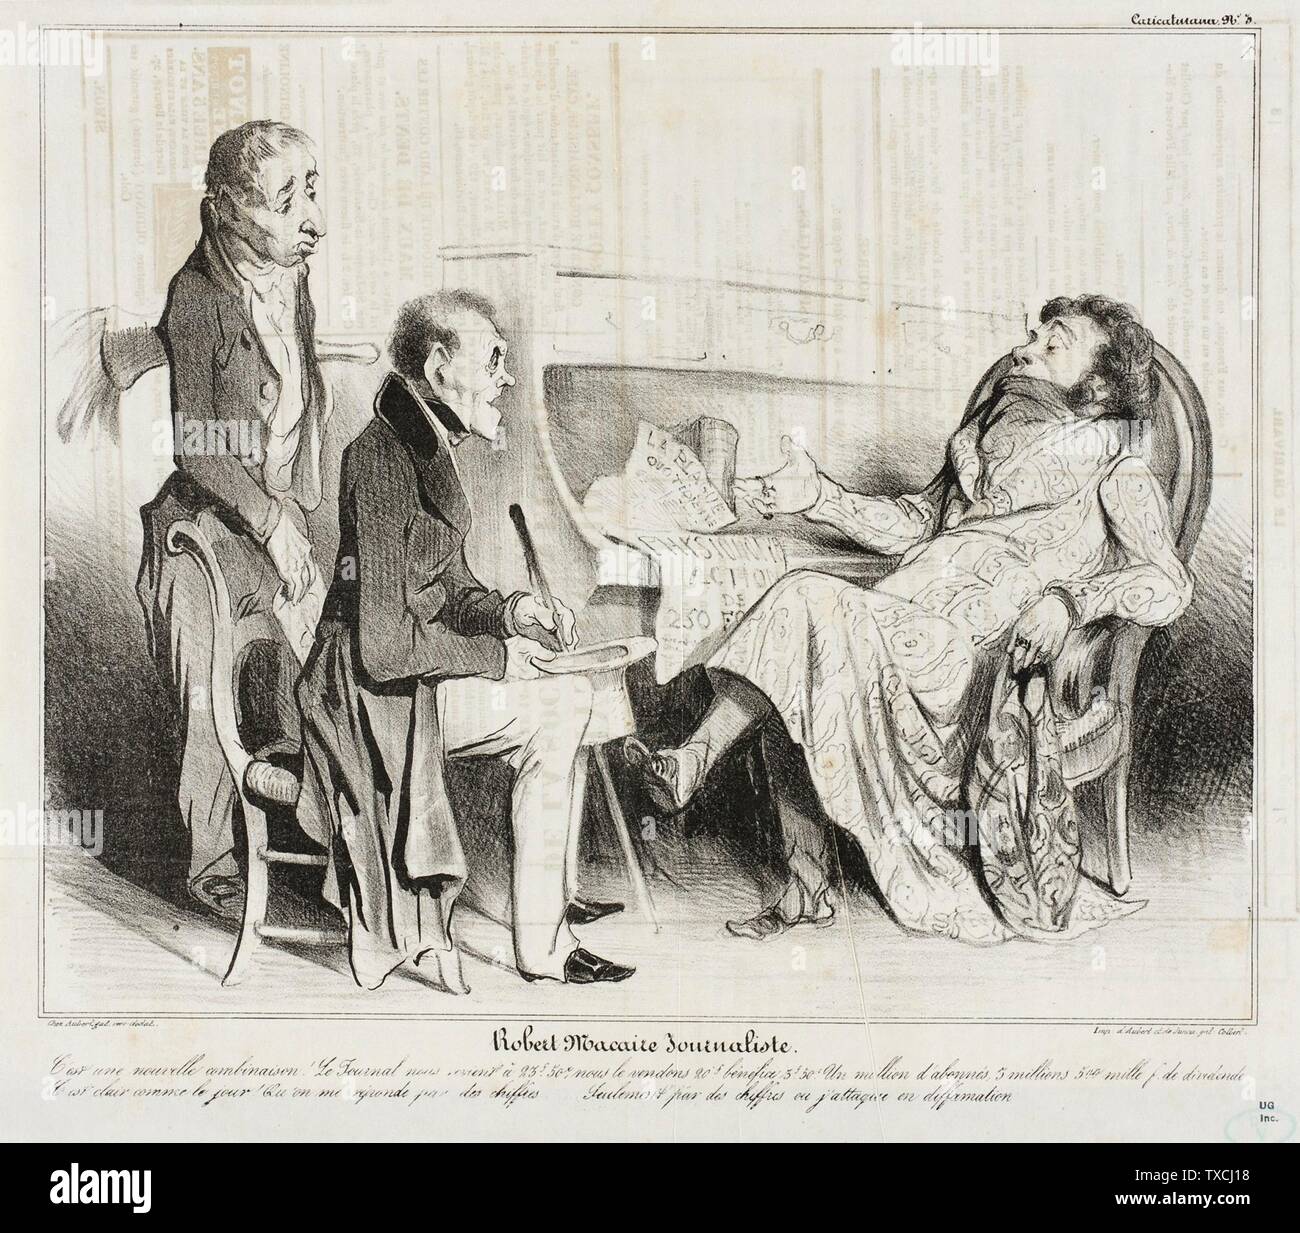 Robert Macaire Journaliste;  France, 1836 Series: Robert Macaire Periodical: Le Charivari, 10 September 1836 Prints; lithographs Lithograph Sheet: 8 1/2 x 10 7/16 in. (21.59 x 26.51 cm) Gift of Mrs. Florence Victor from The David and Florence Victor Collection (M.91.82.92) Prints and Drawings; 1836date QS:P571,+1836-00-00T00:00:00Z/9; Stock Photo